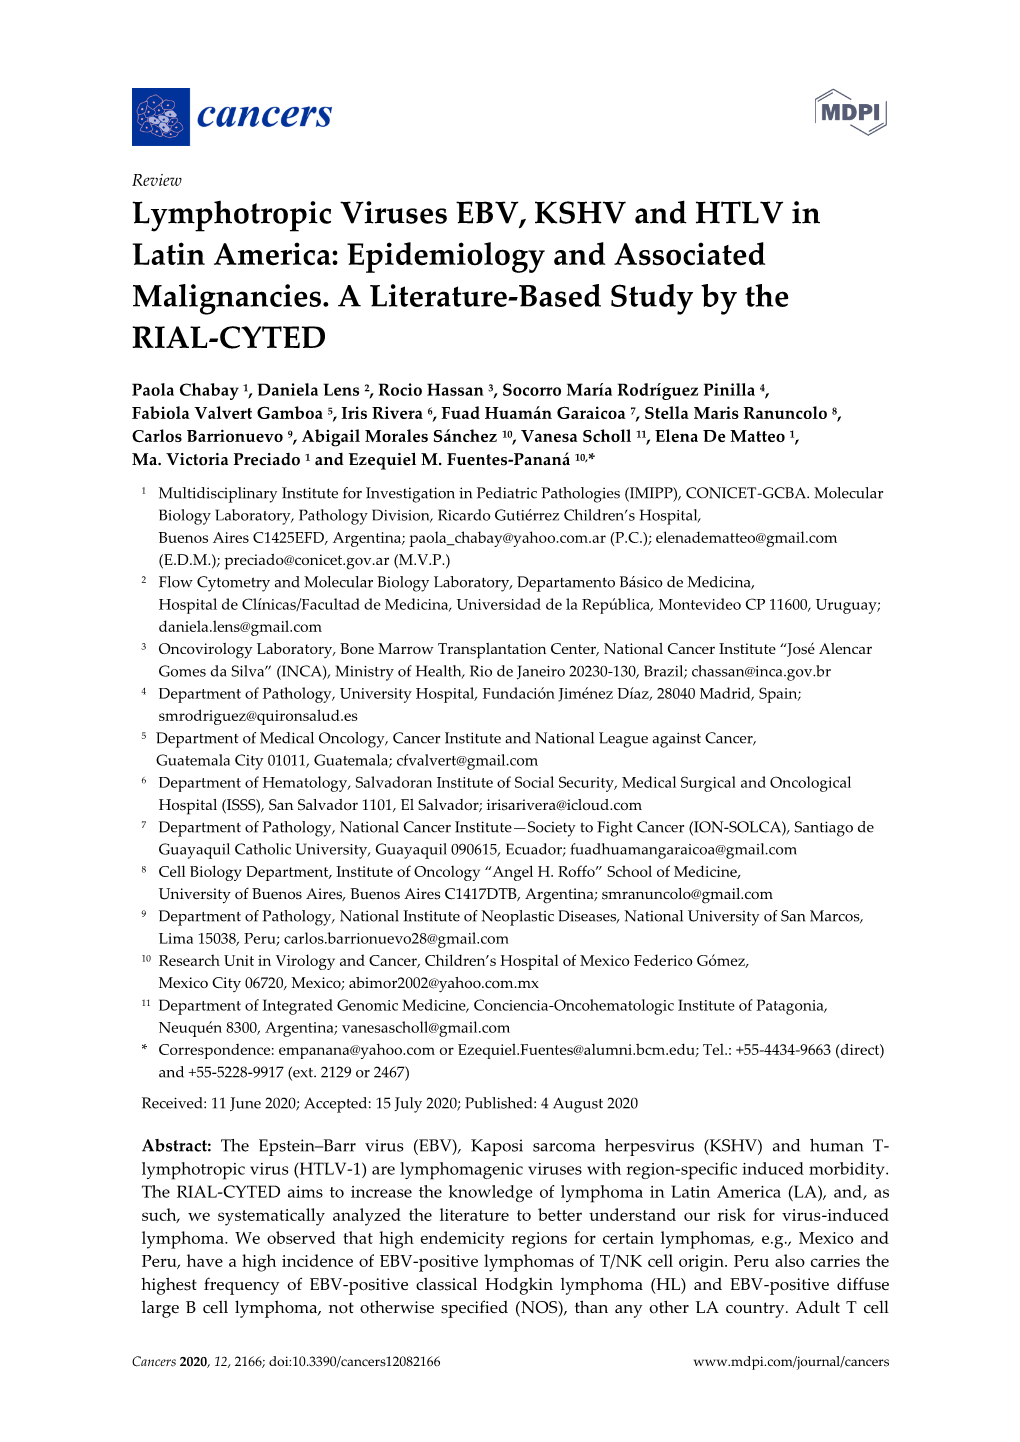 Lymphotropic Viruses EBV, KSHV and HTLV in Latin America: Epidemiology and Associated Malignancies